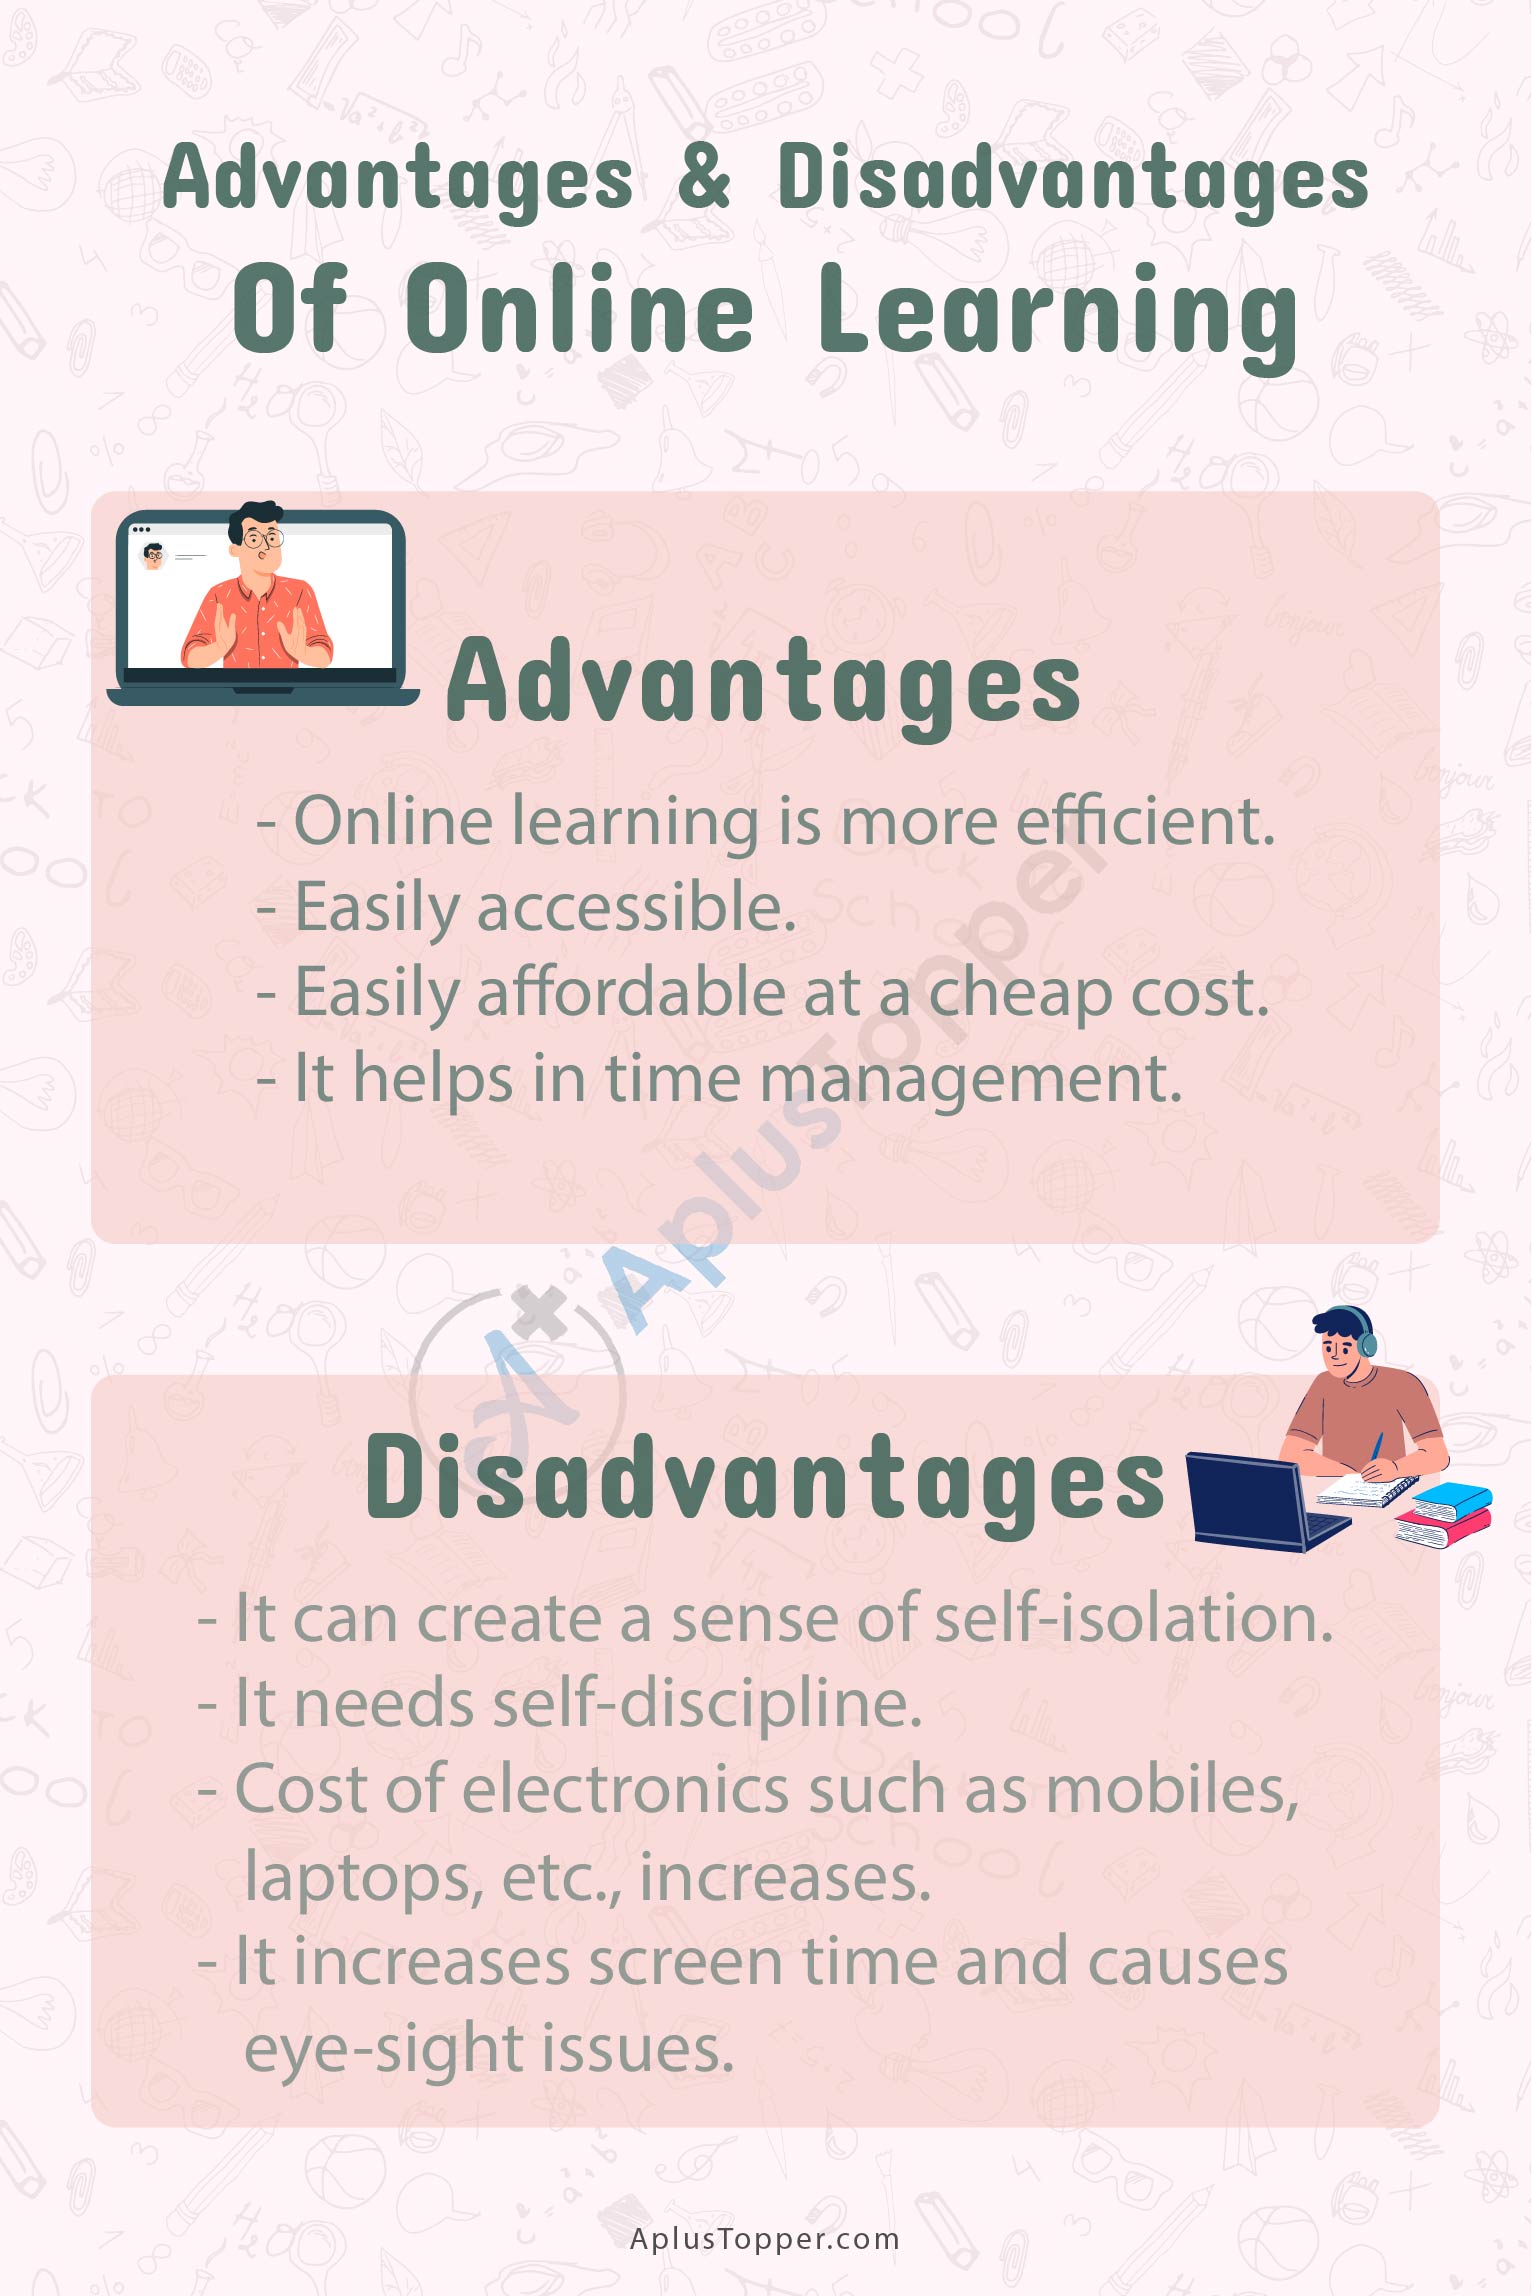 What are the disadvantages of elearning?